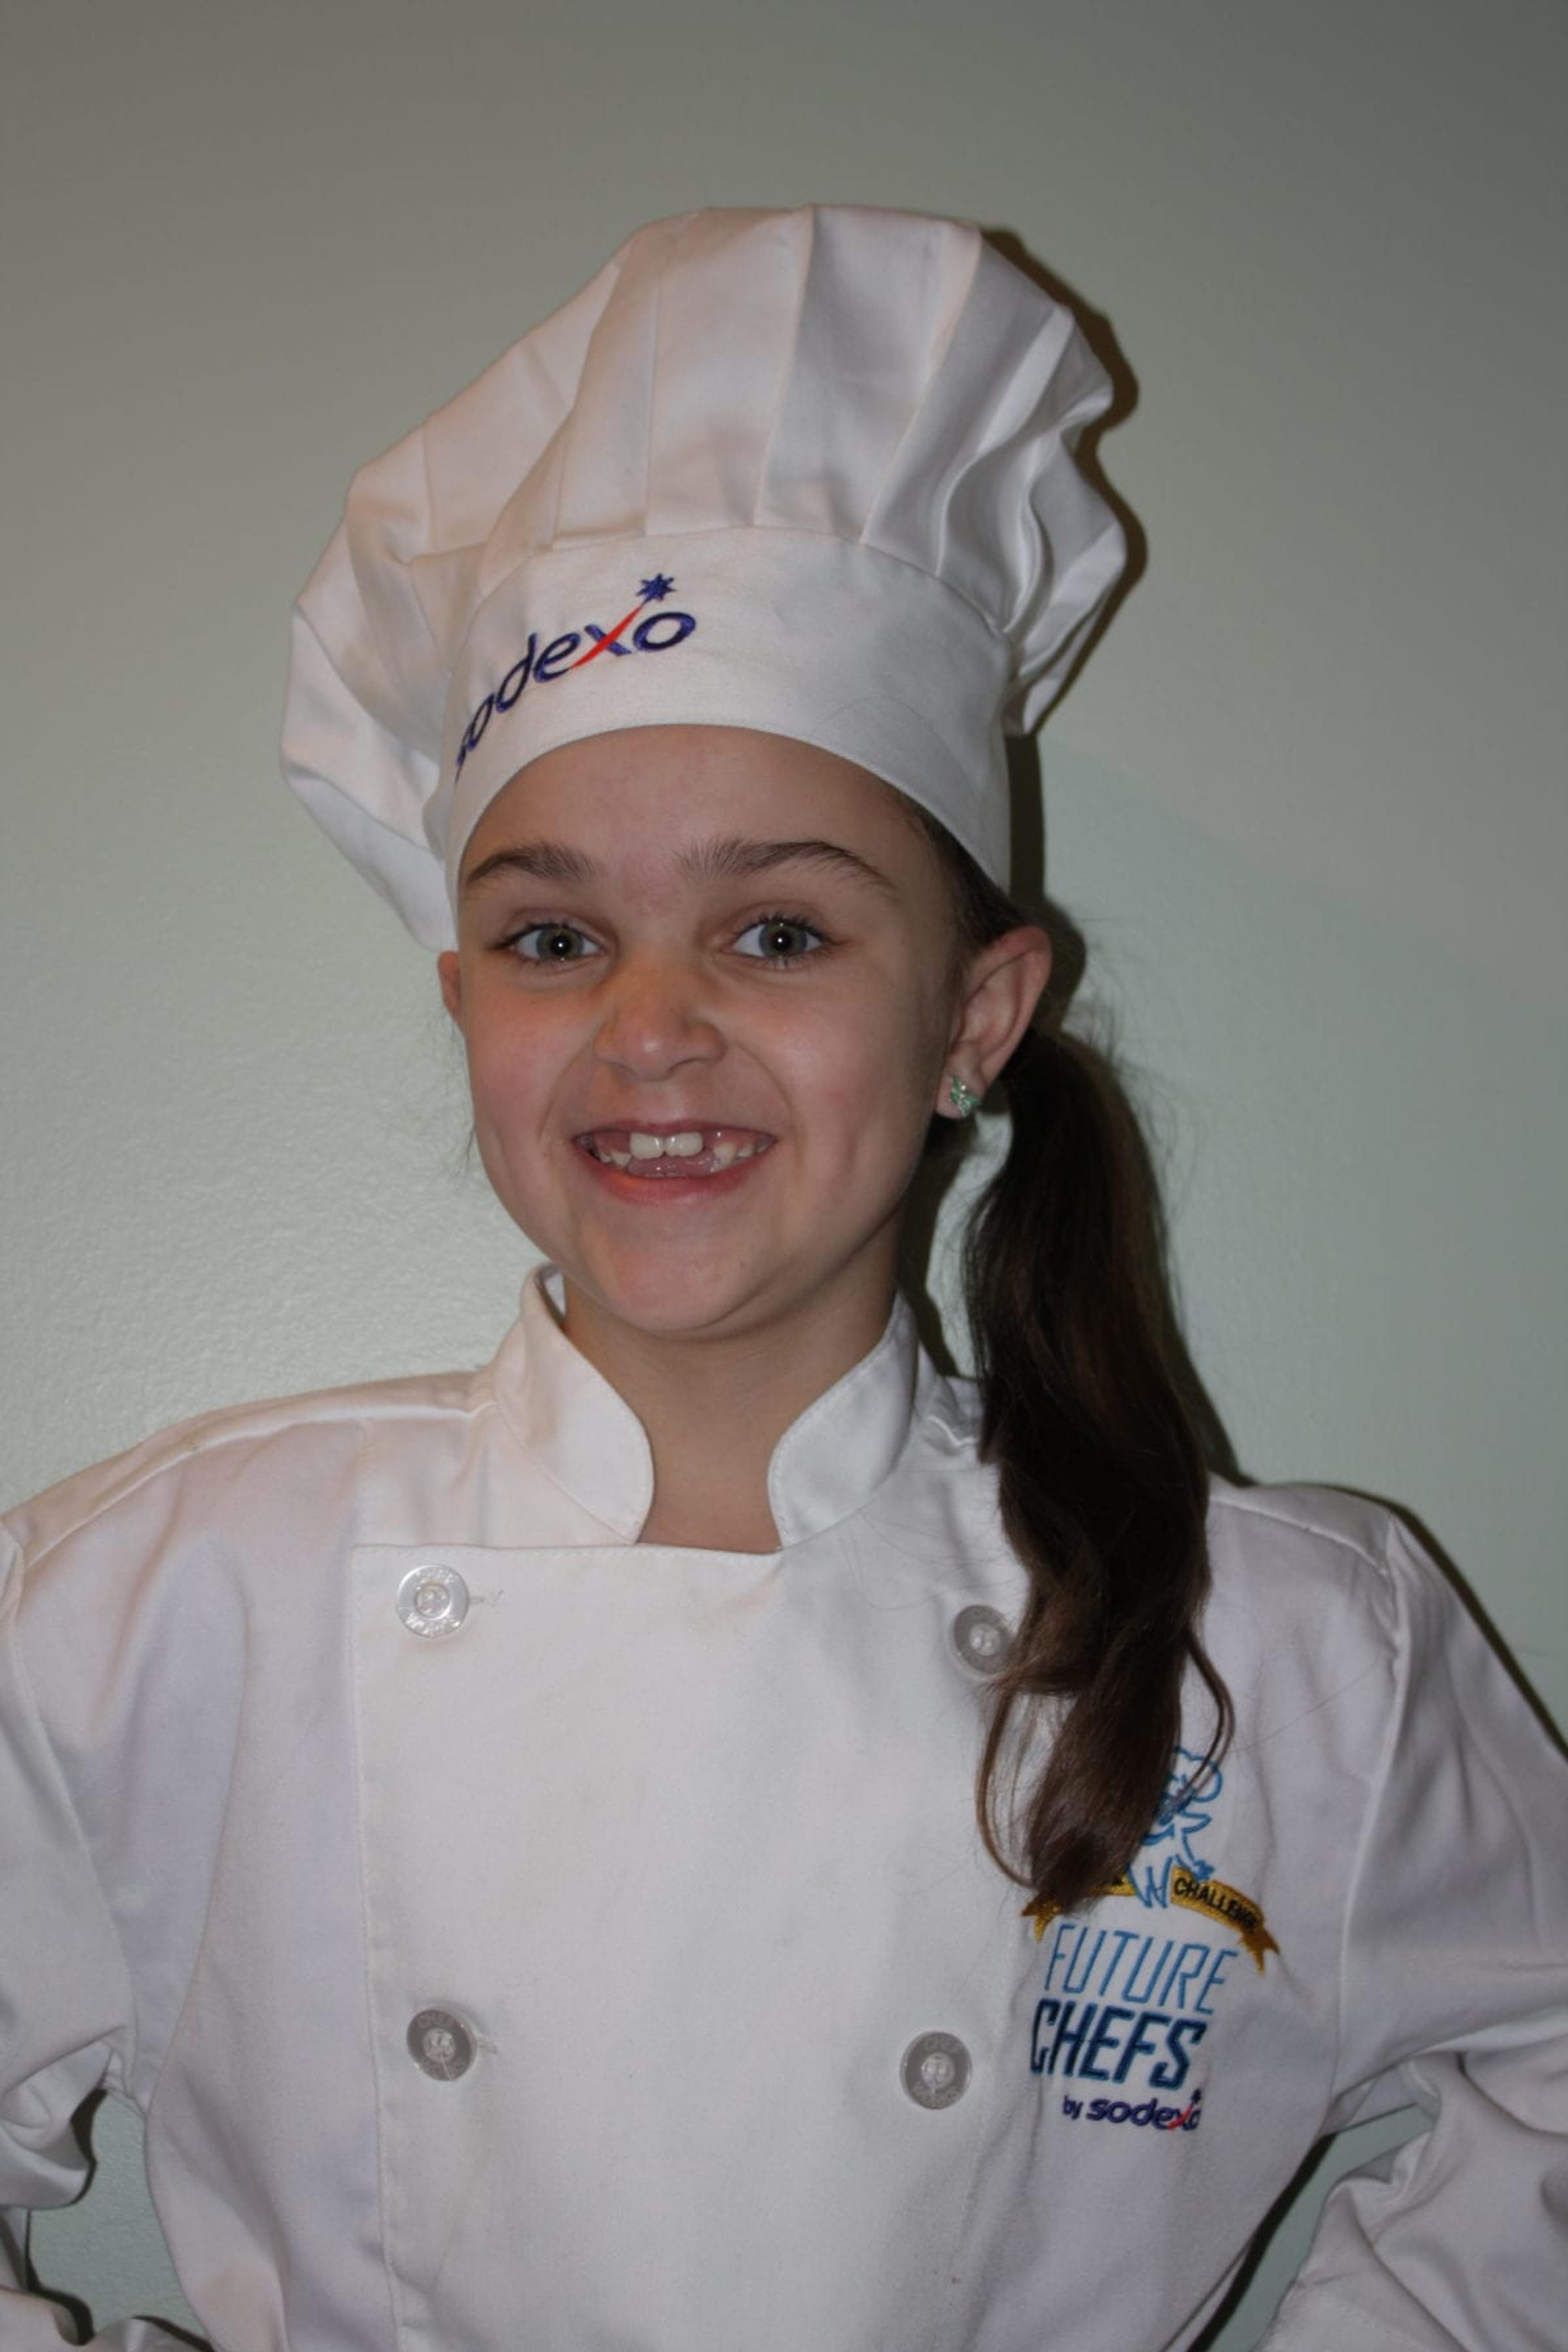 Isabelle Sarkody, 7, ranked in the top five finalists of nearly 2,500 entries in the Future Chefs Healthy Breakfast Competition.